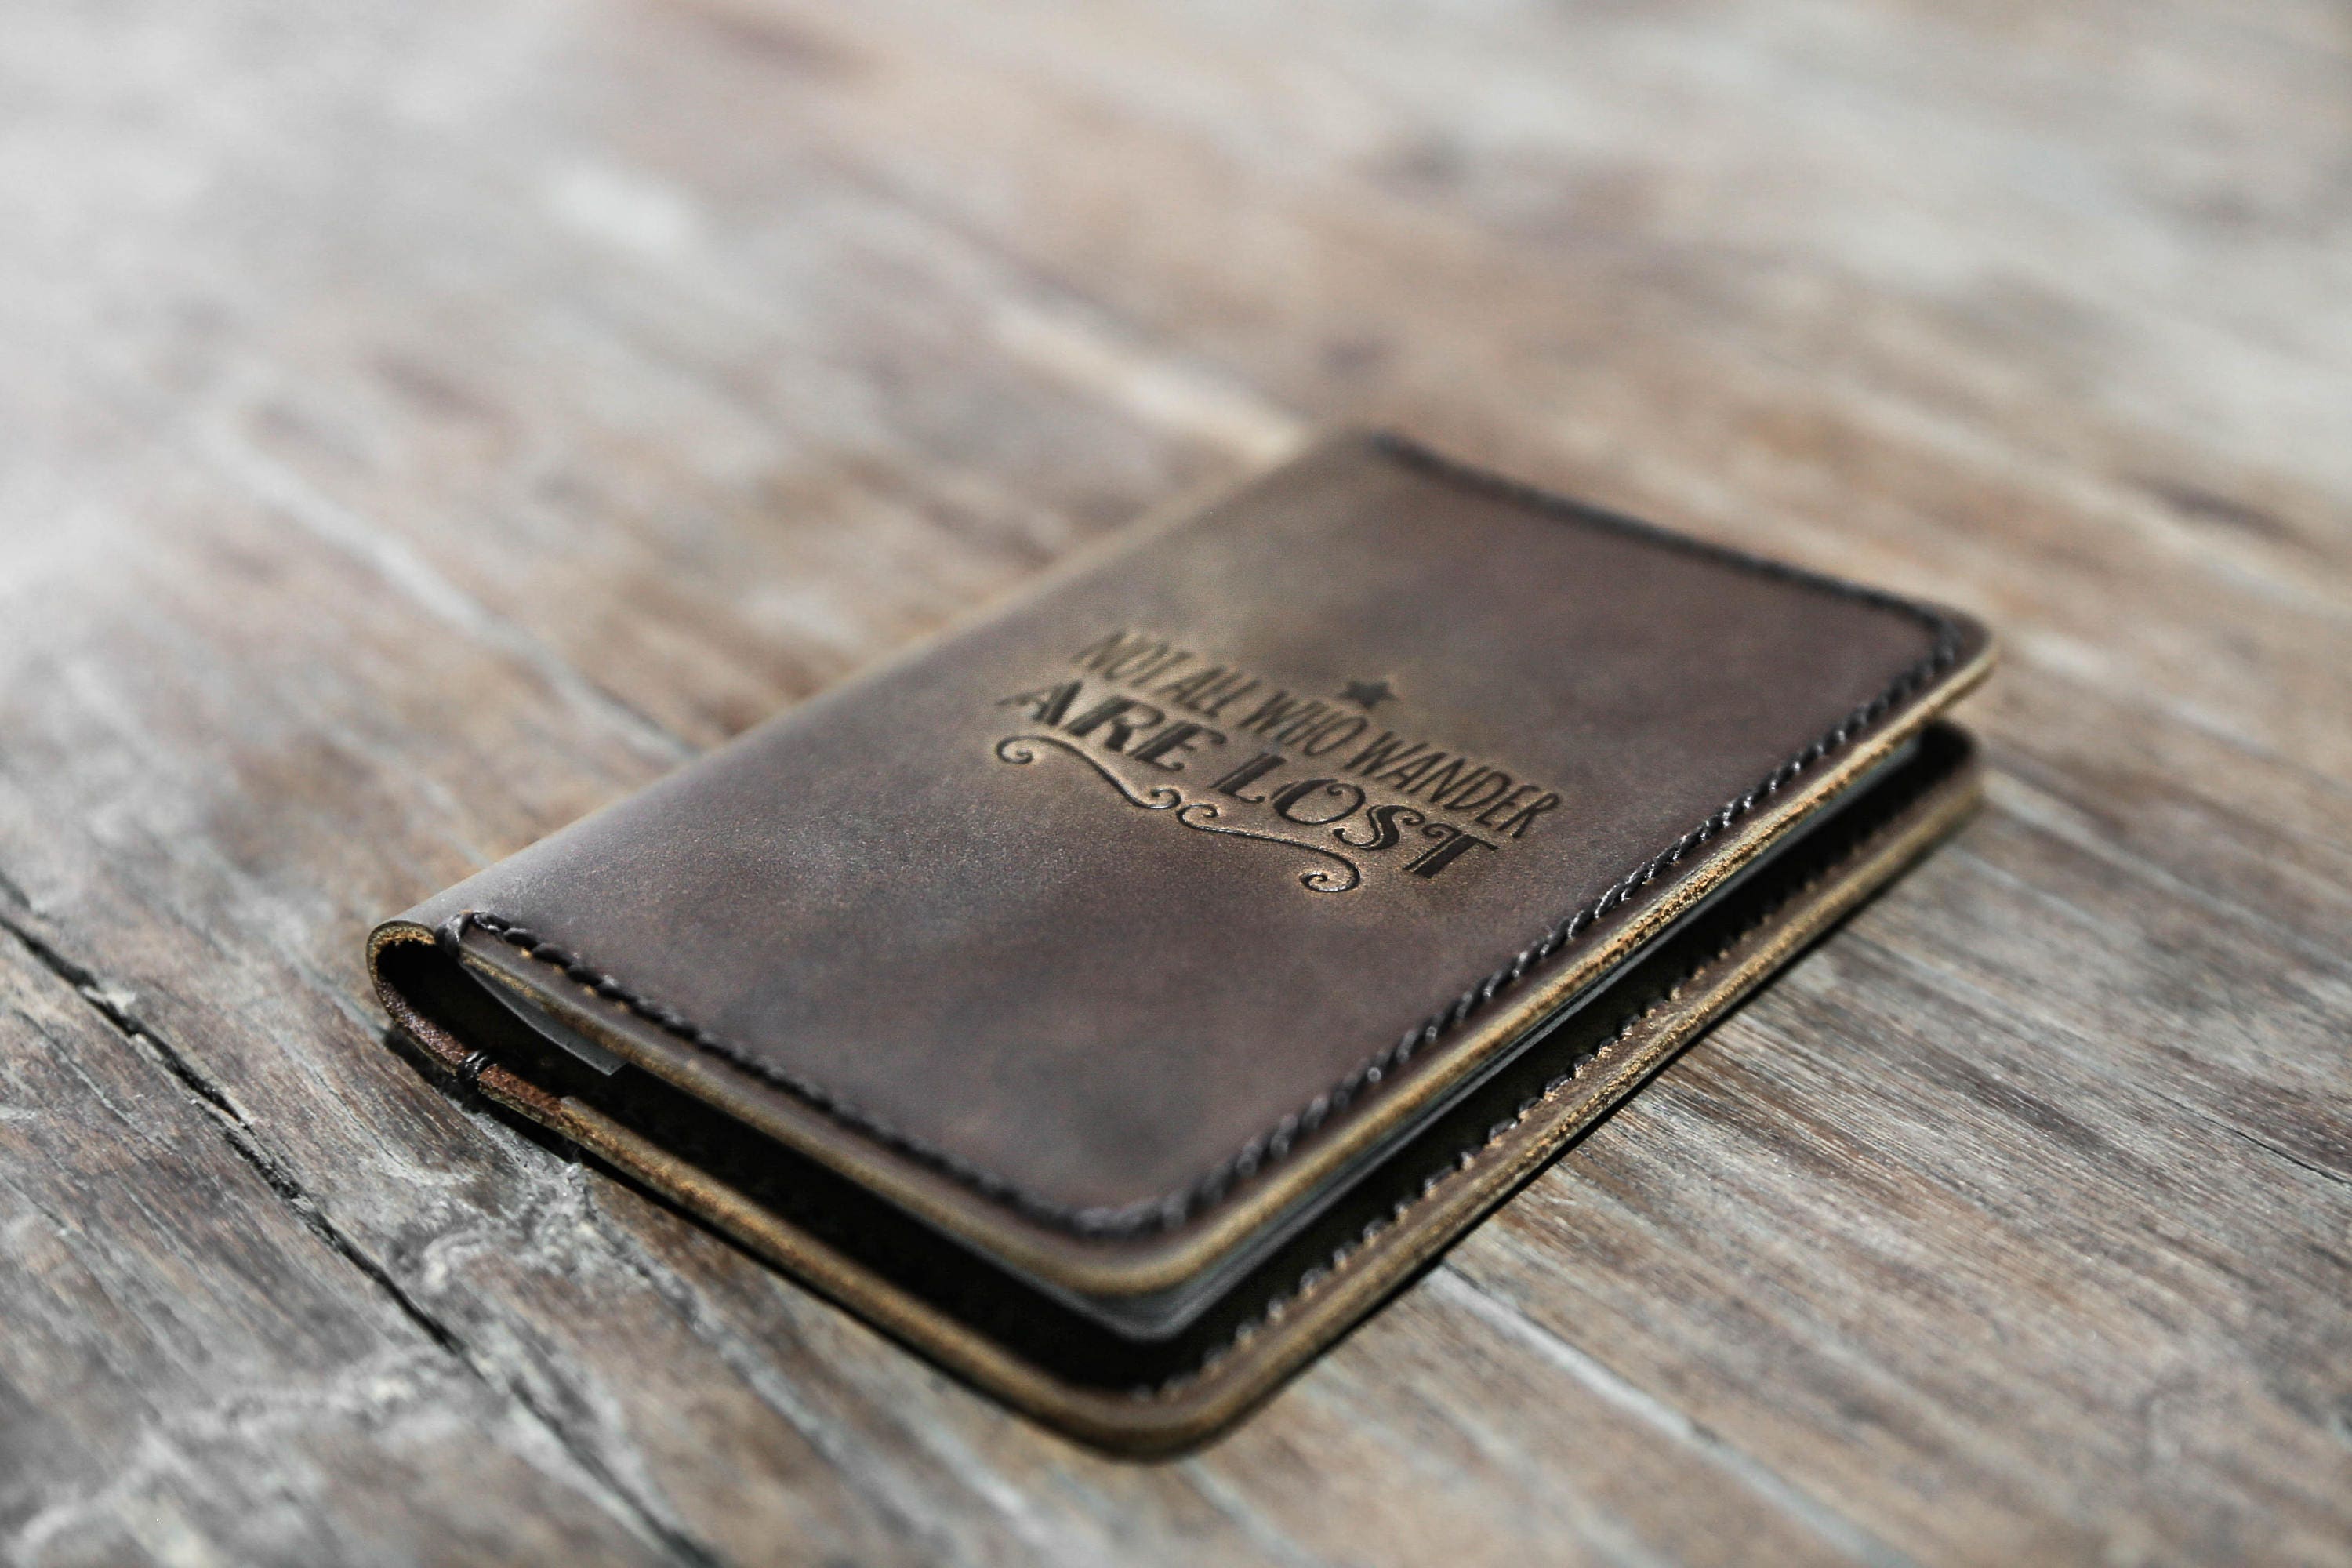 Personalized Passport Cover  Handmade Travel Wallet By JooJoobs